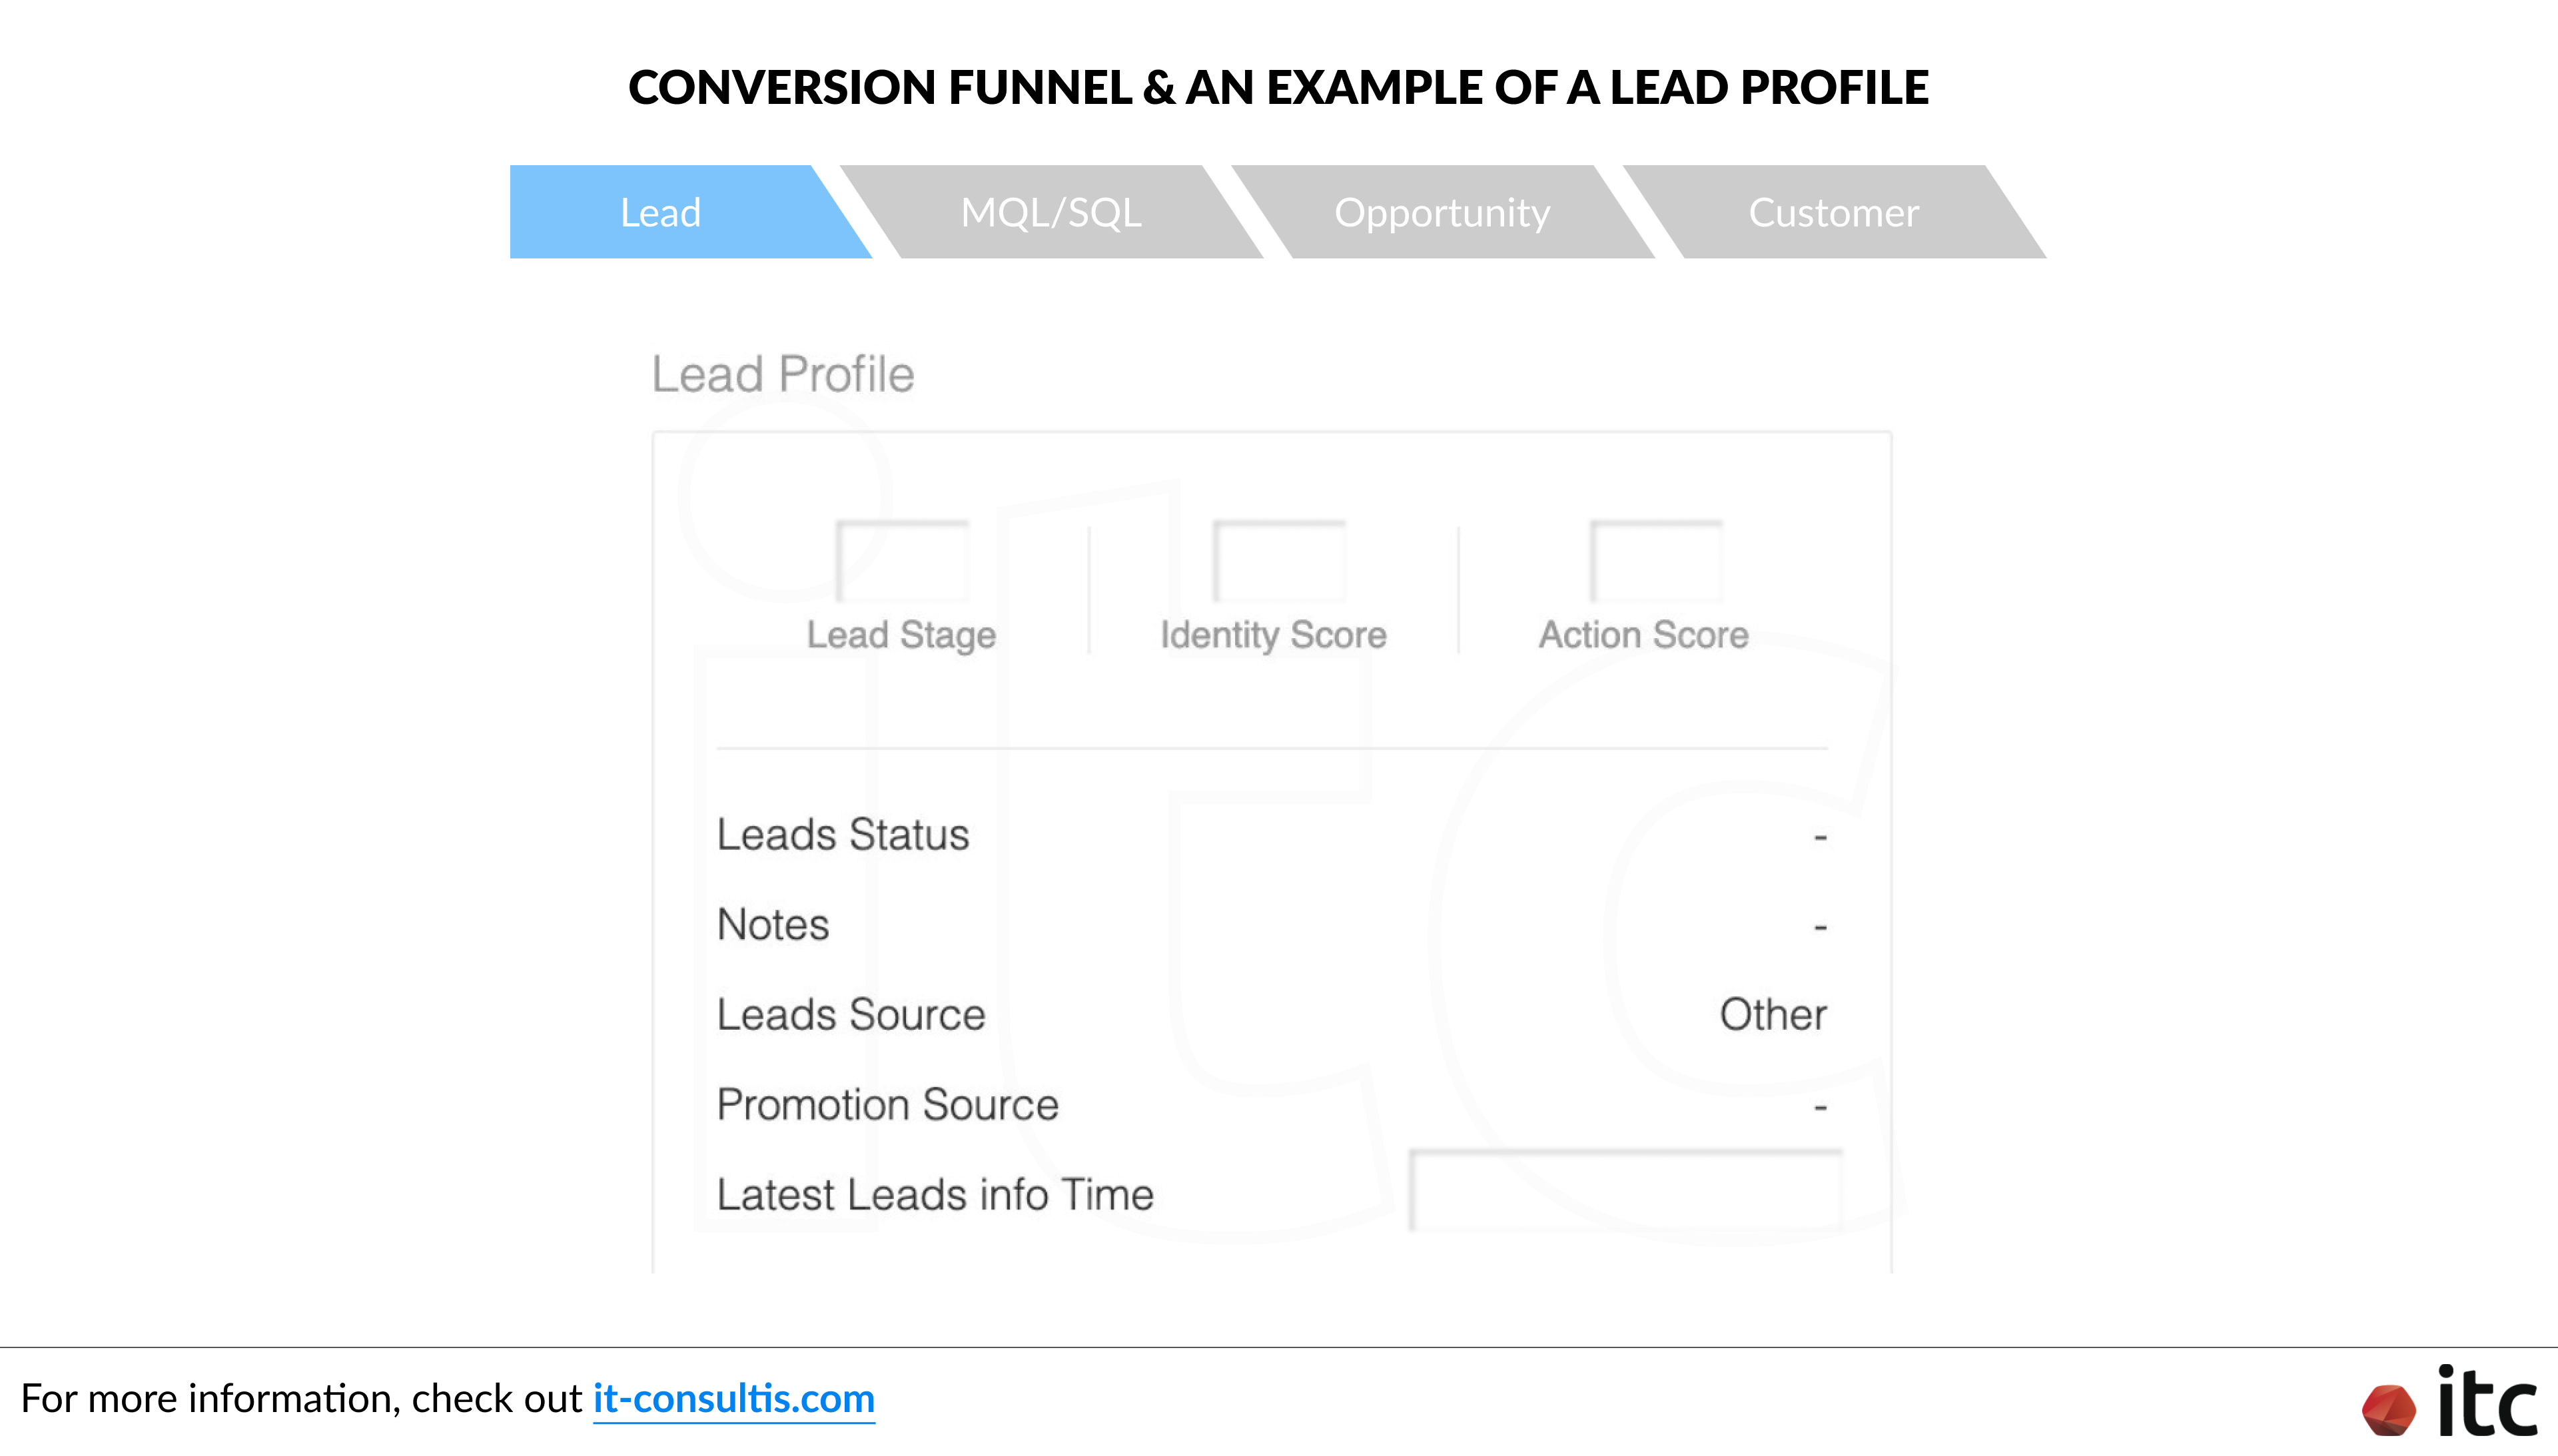 The conversion funnel and an example of a lead profile on a Social CRM tool - JingSocial